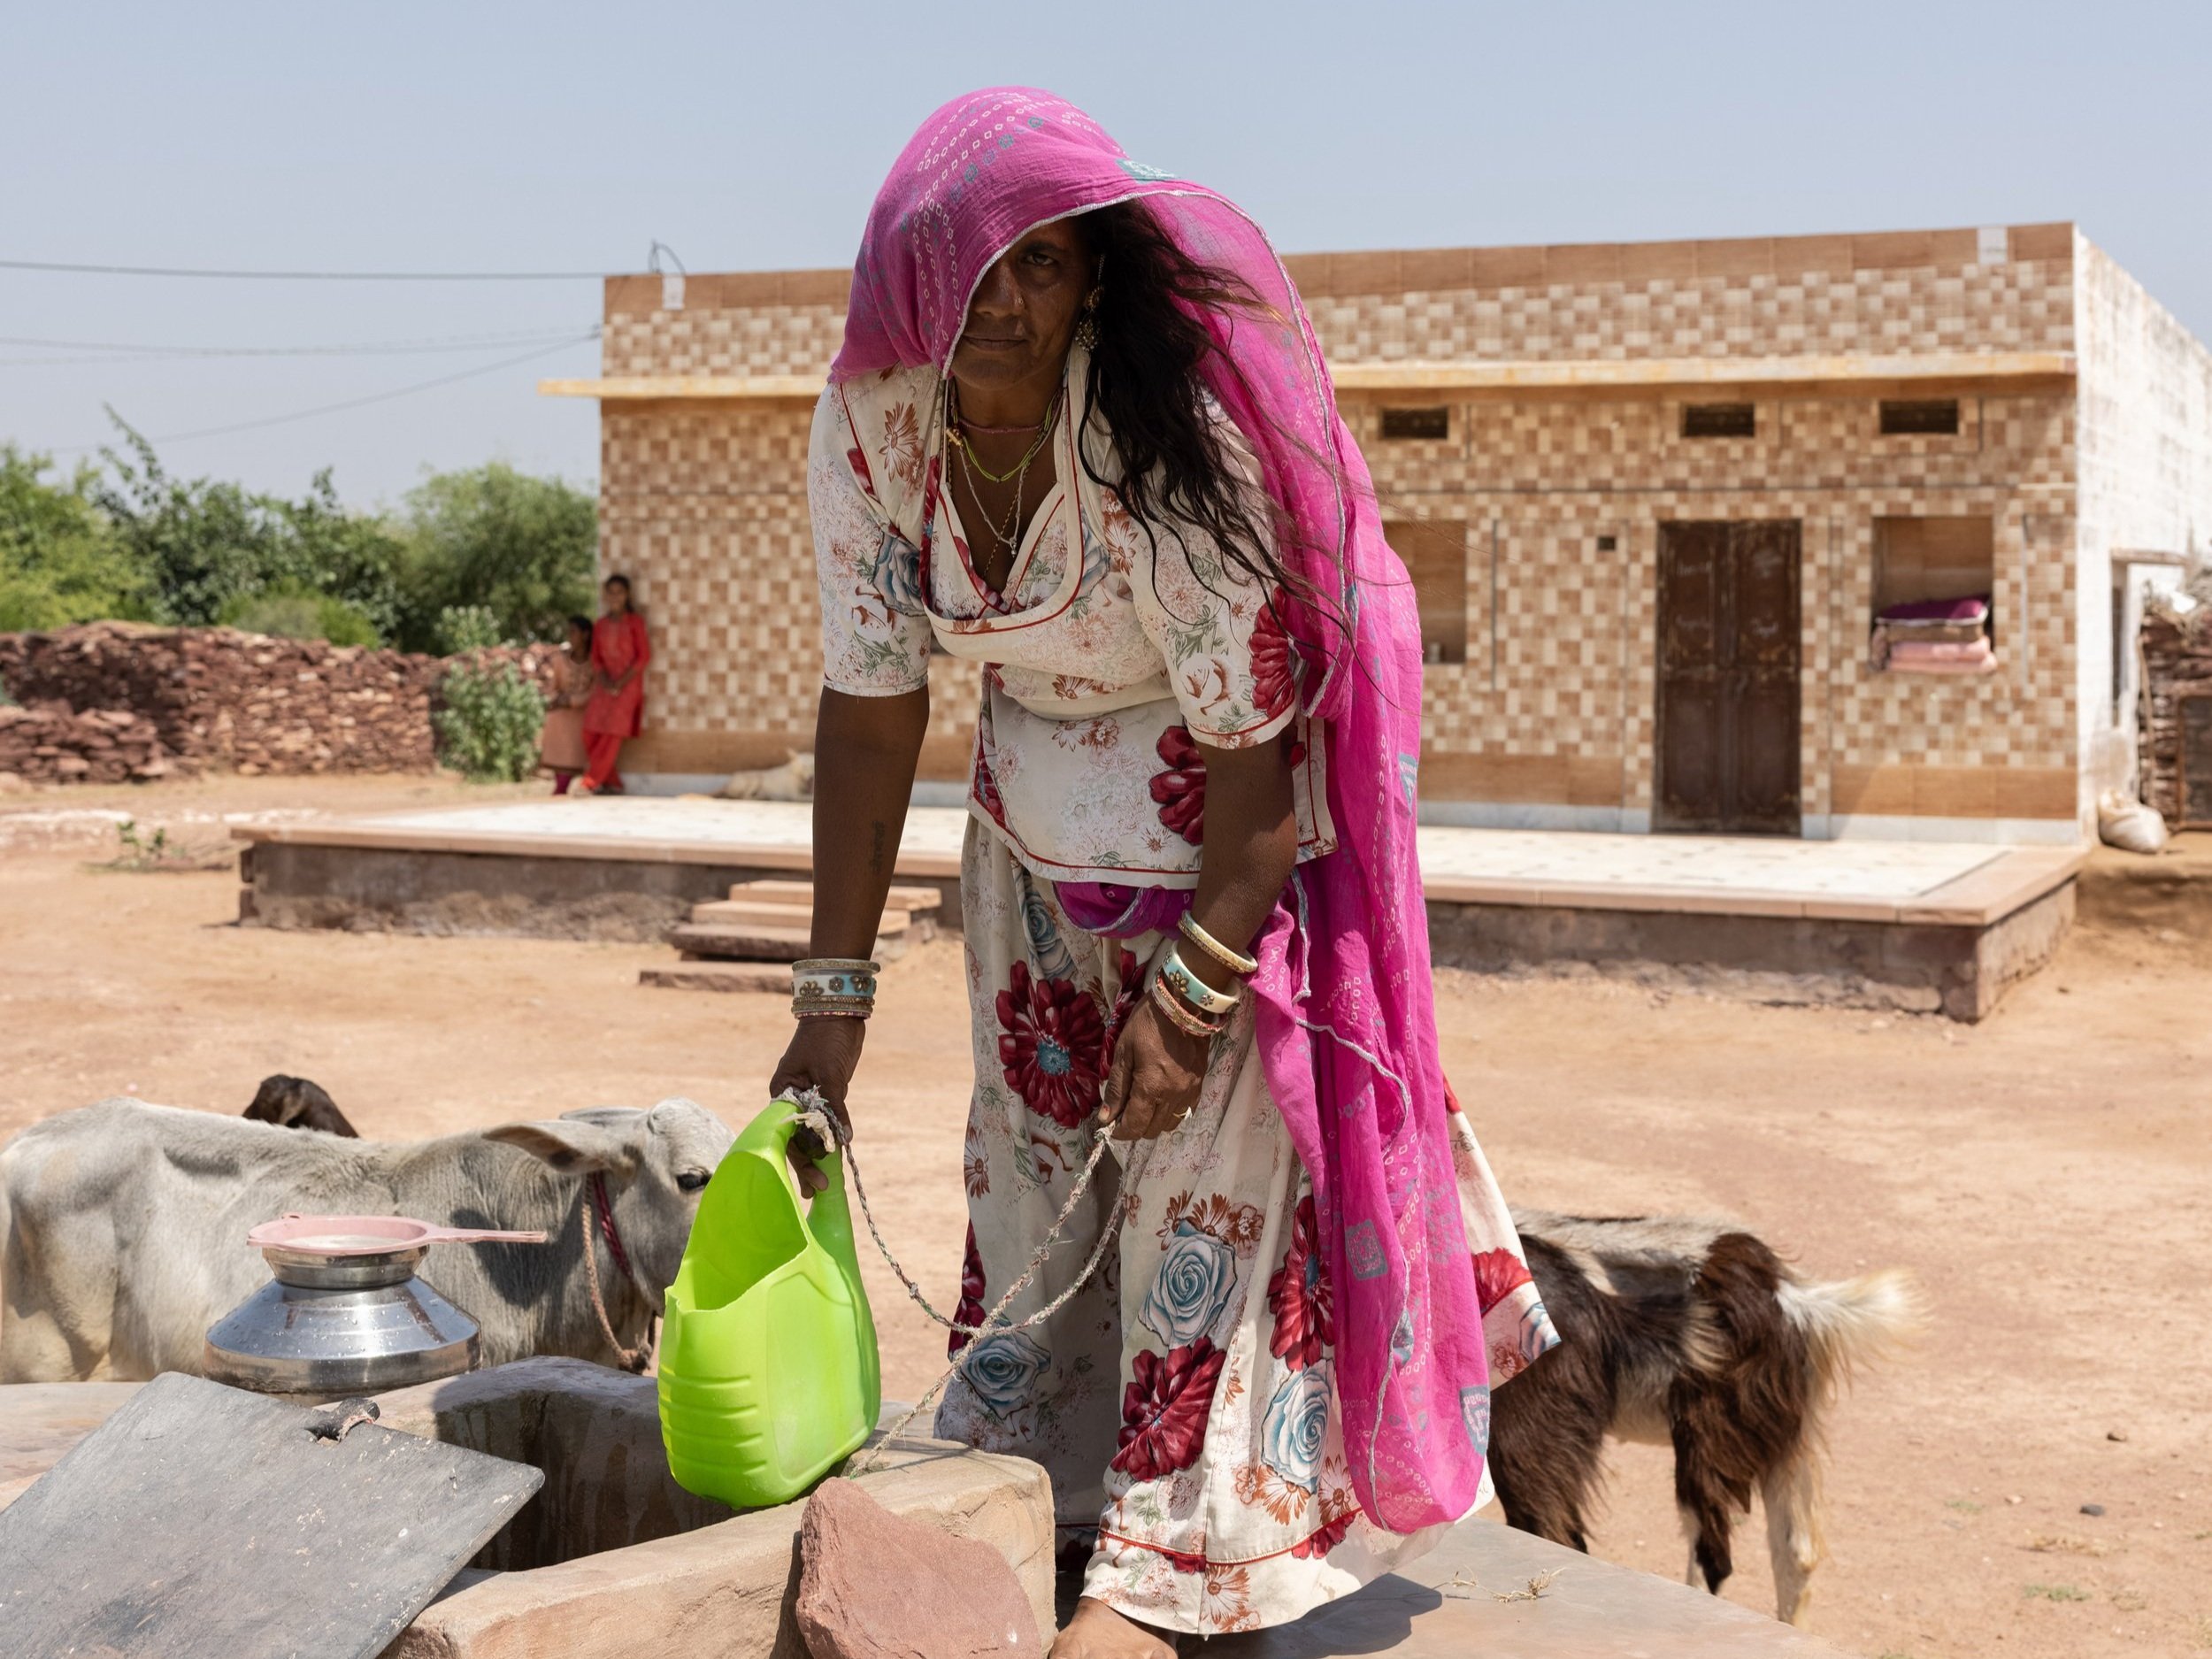 Jiwani Devi collects water from the rainwater harvesting tank outside her home in the Thar Desert.